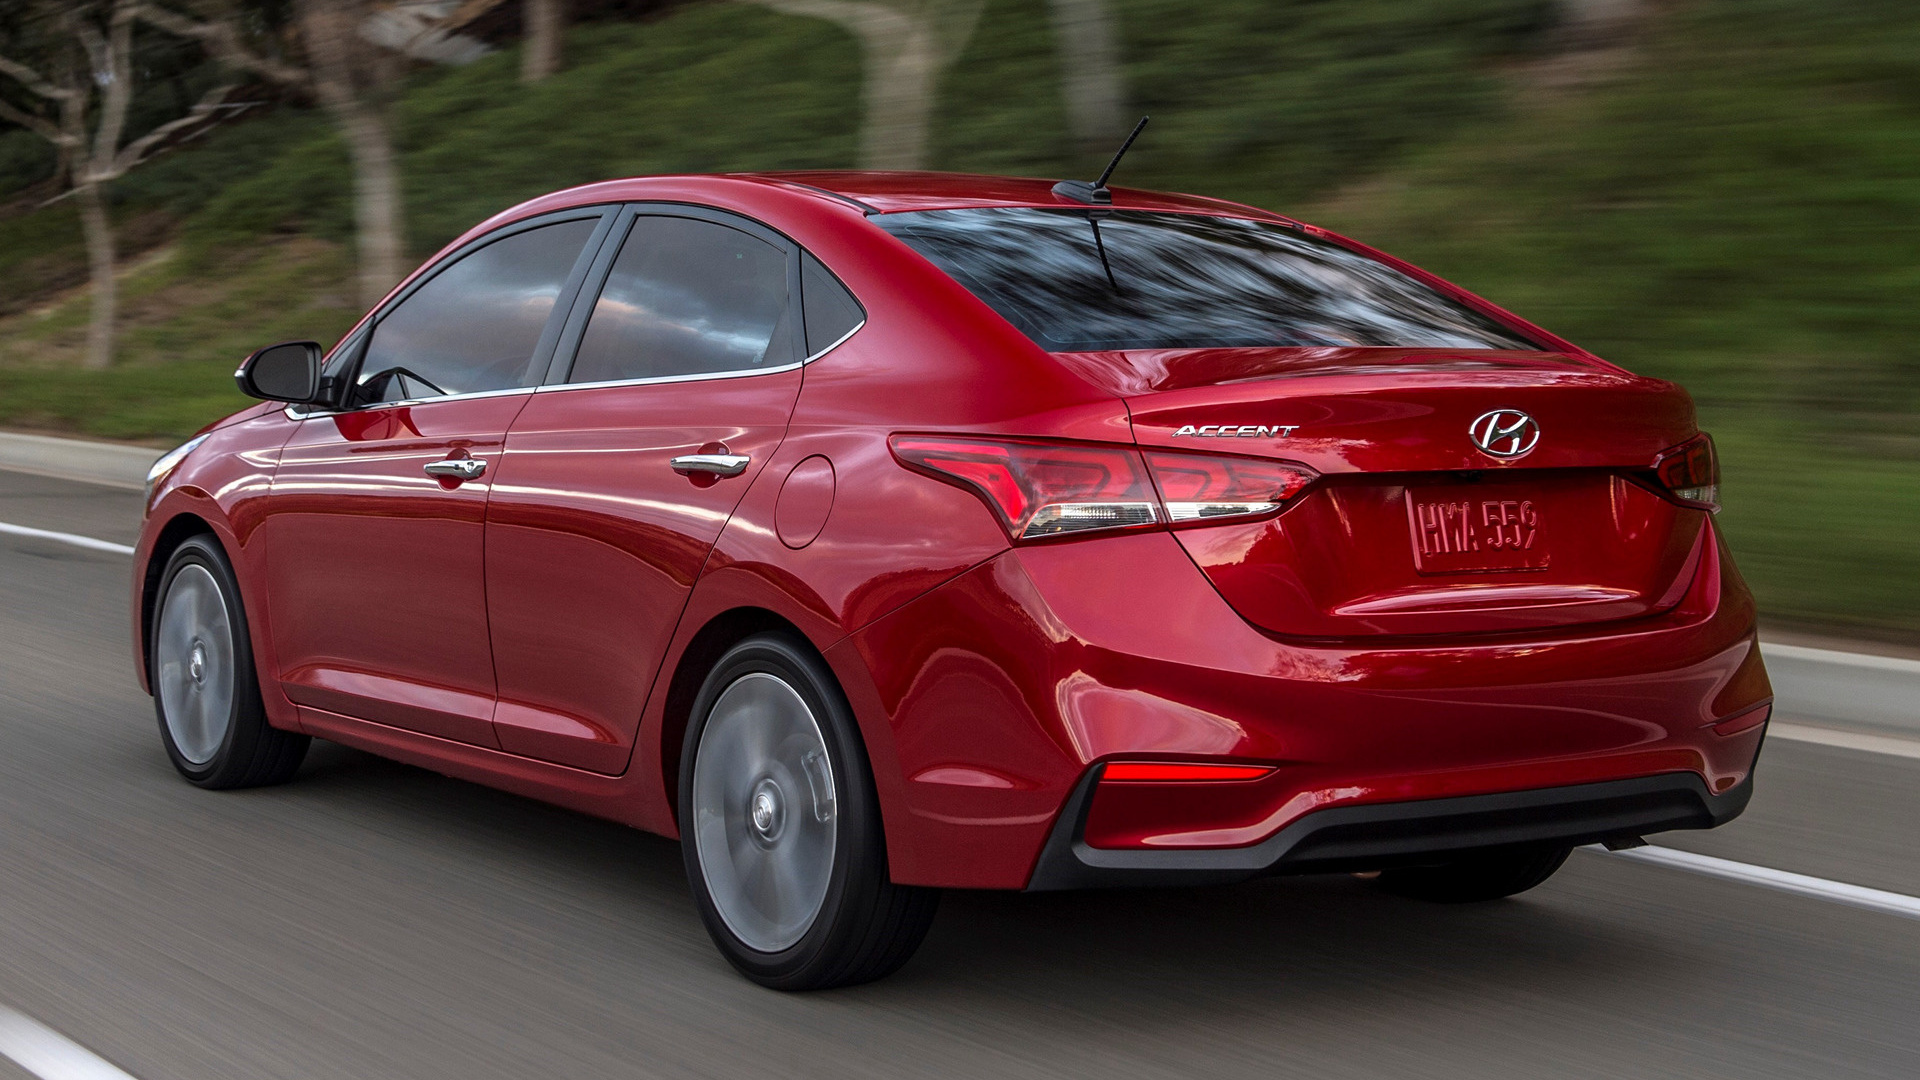 2018 Hyundai Accent (US) - Wallpapers and HD Images | Car Pixel